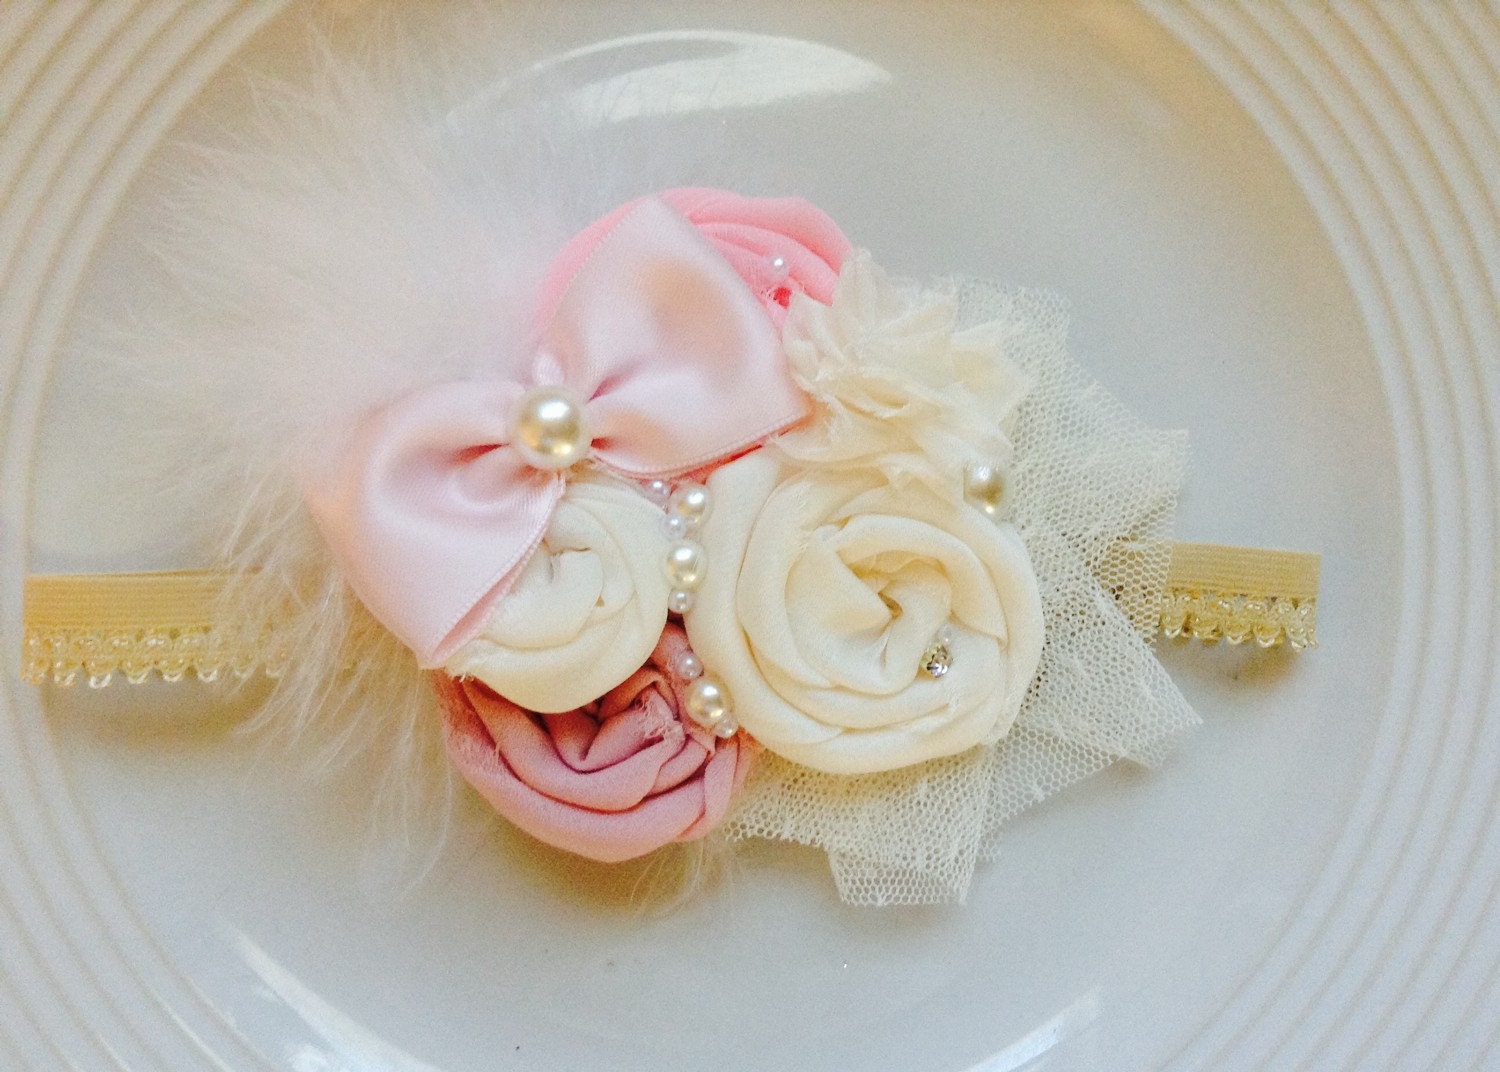 Pink and Cream Rosettes by JensBowdaciousBows on Etsy